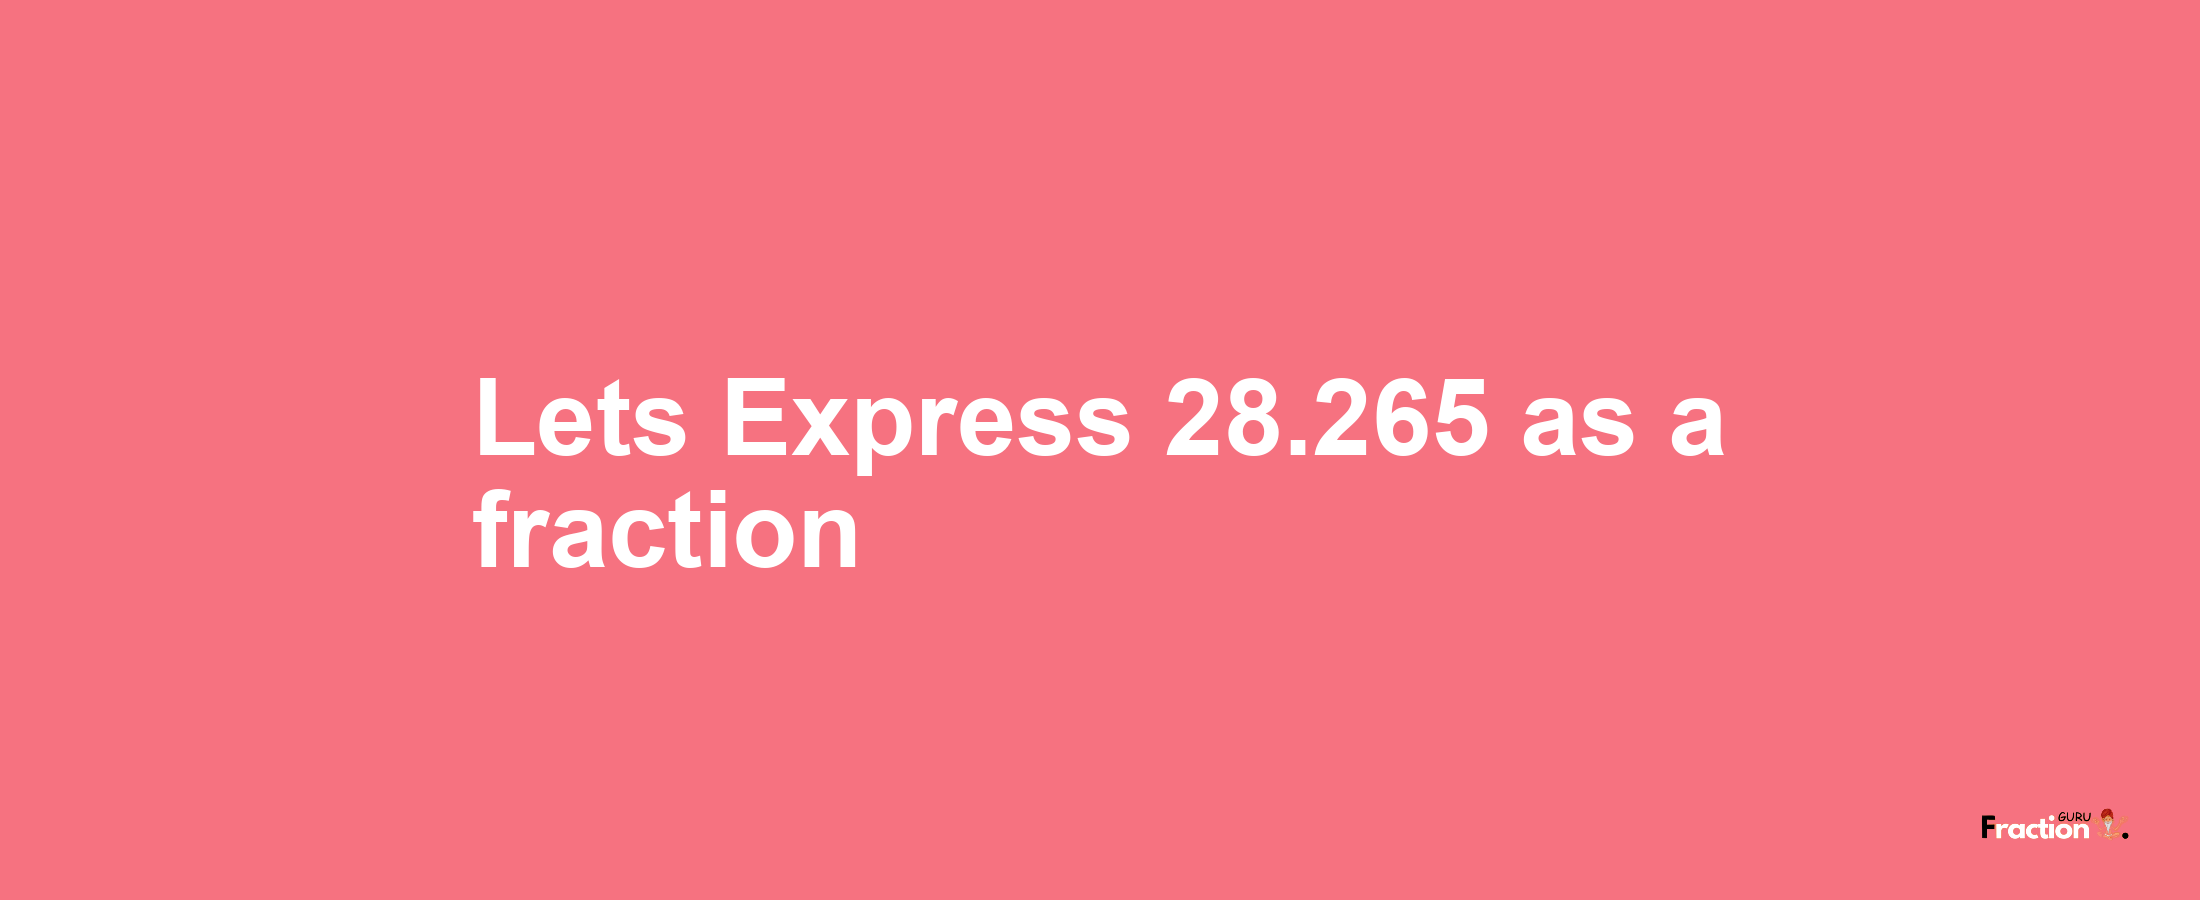 Lets Express 28.265 as afraction